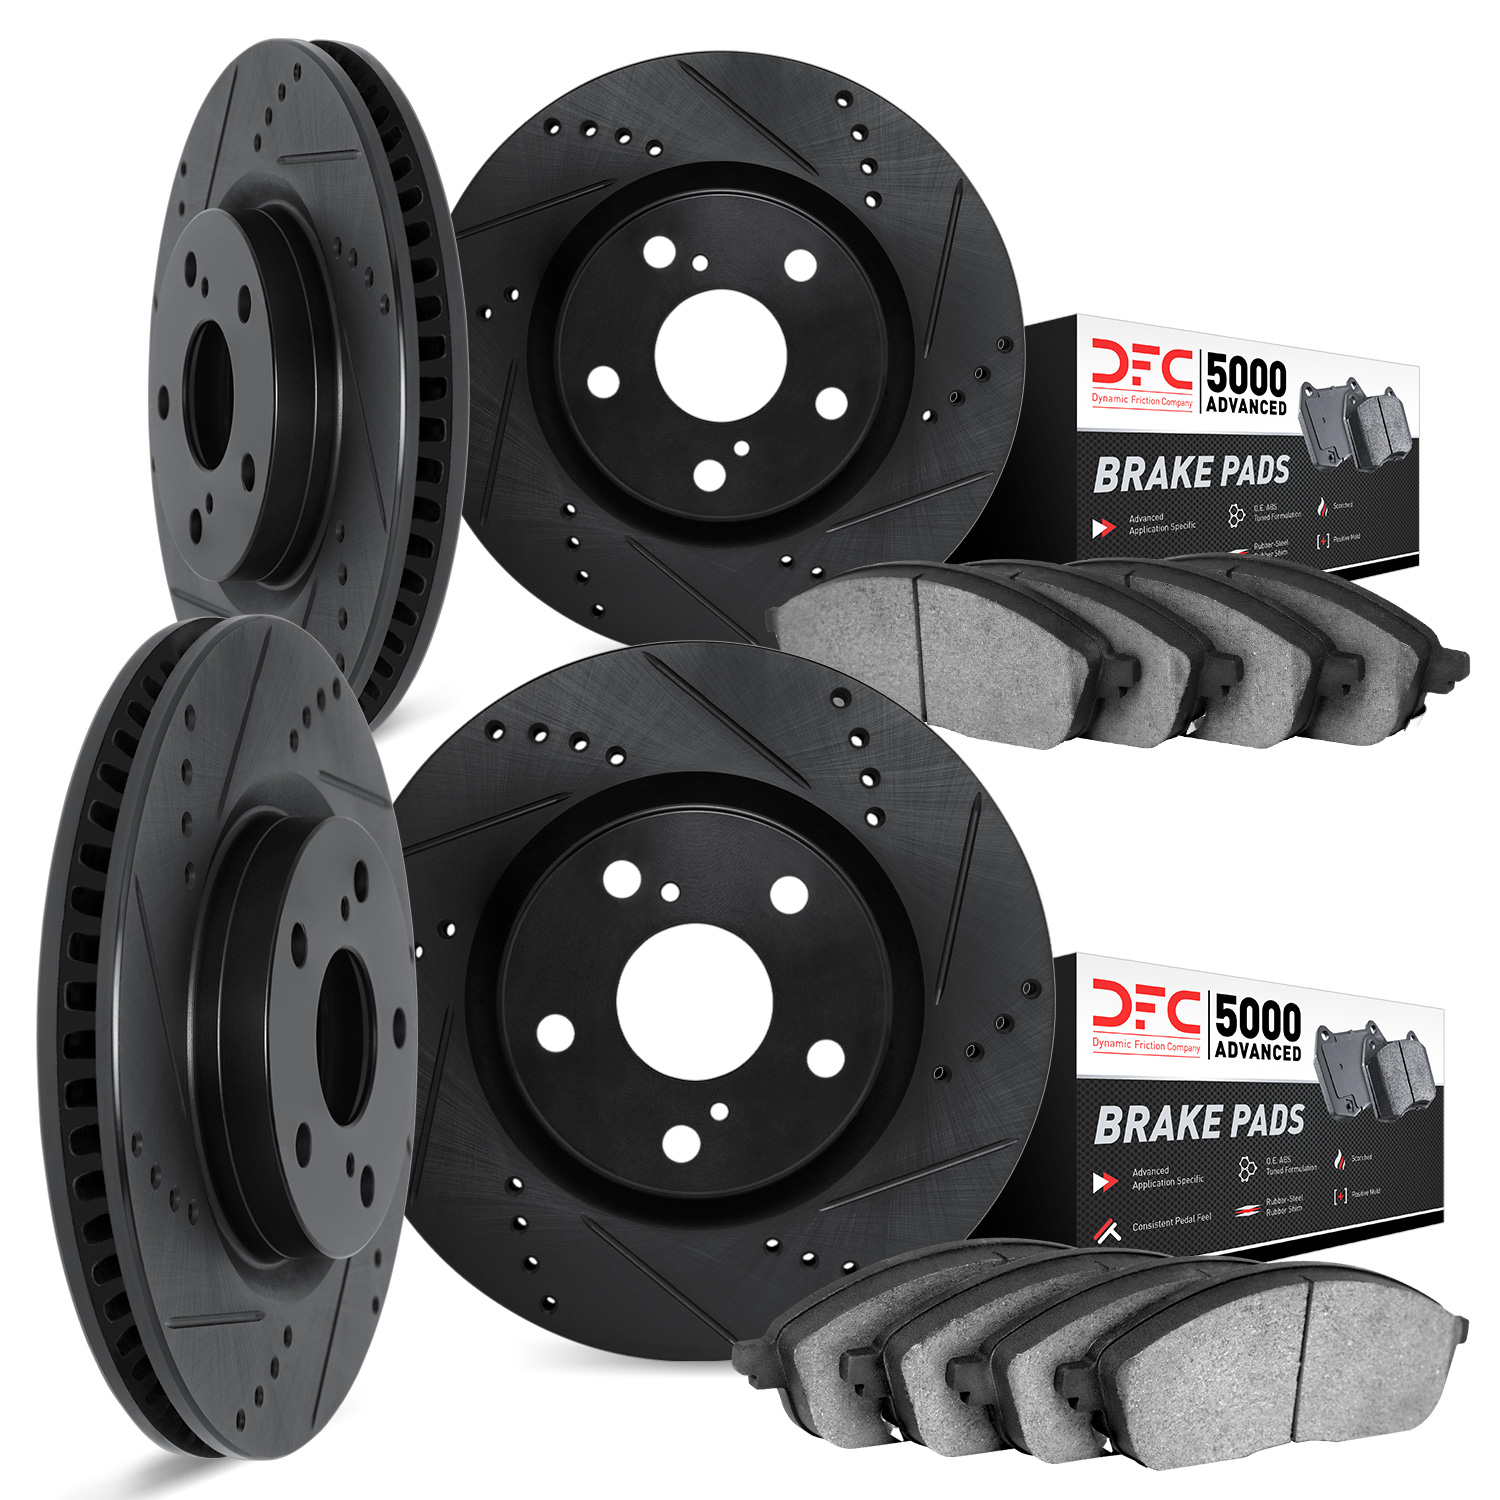 8504-74085 Drilled/Slotted Brake Rotors w/5000 Advanced Brake Pads Kit [Black], 2011-2014 Porsche, Position: Front and Rear